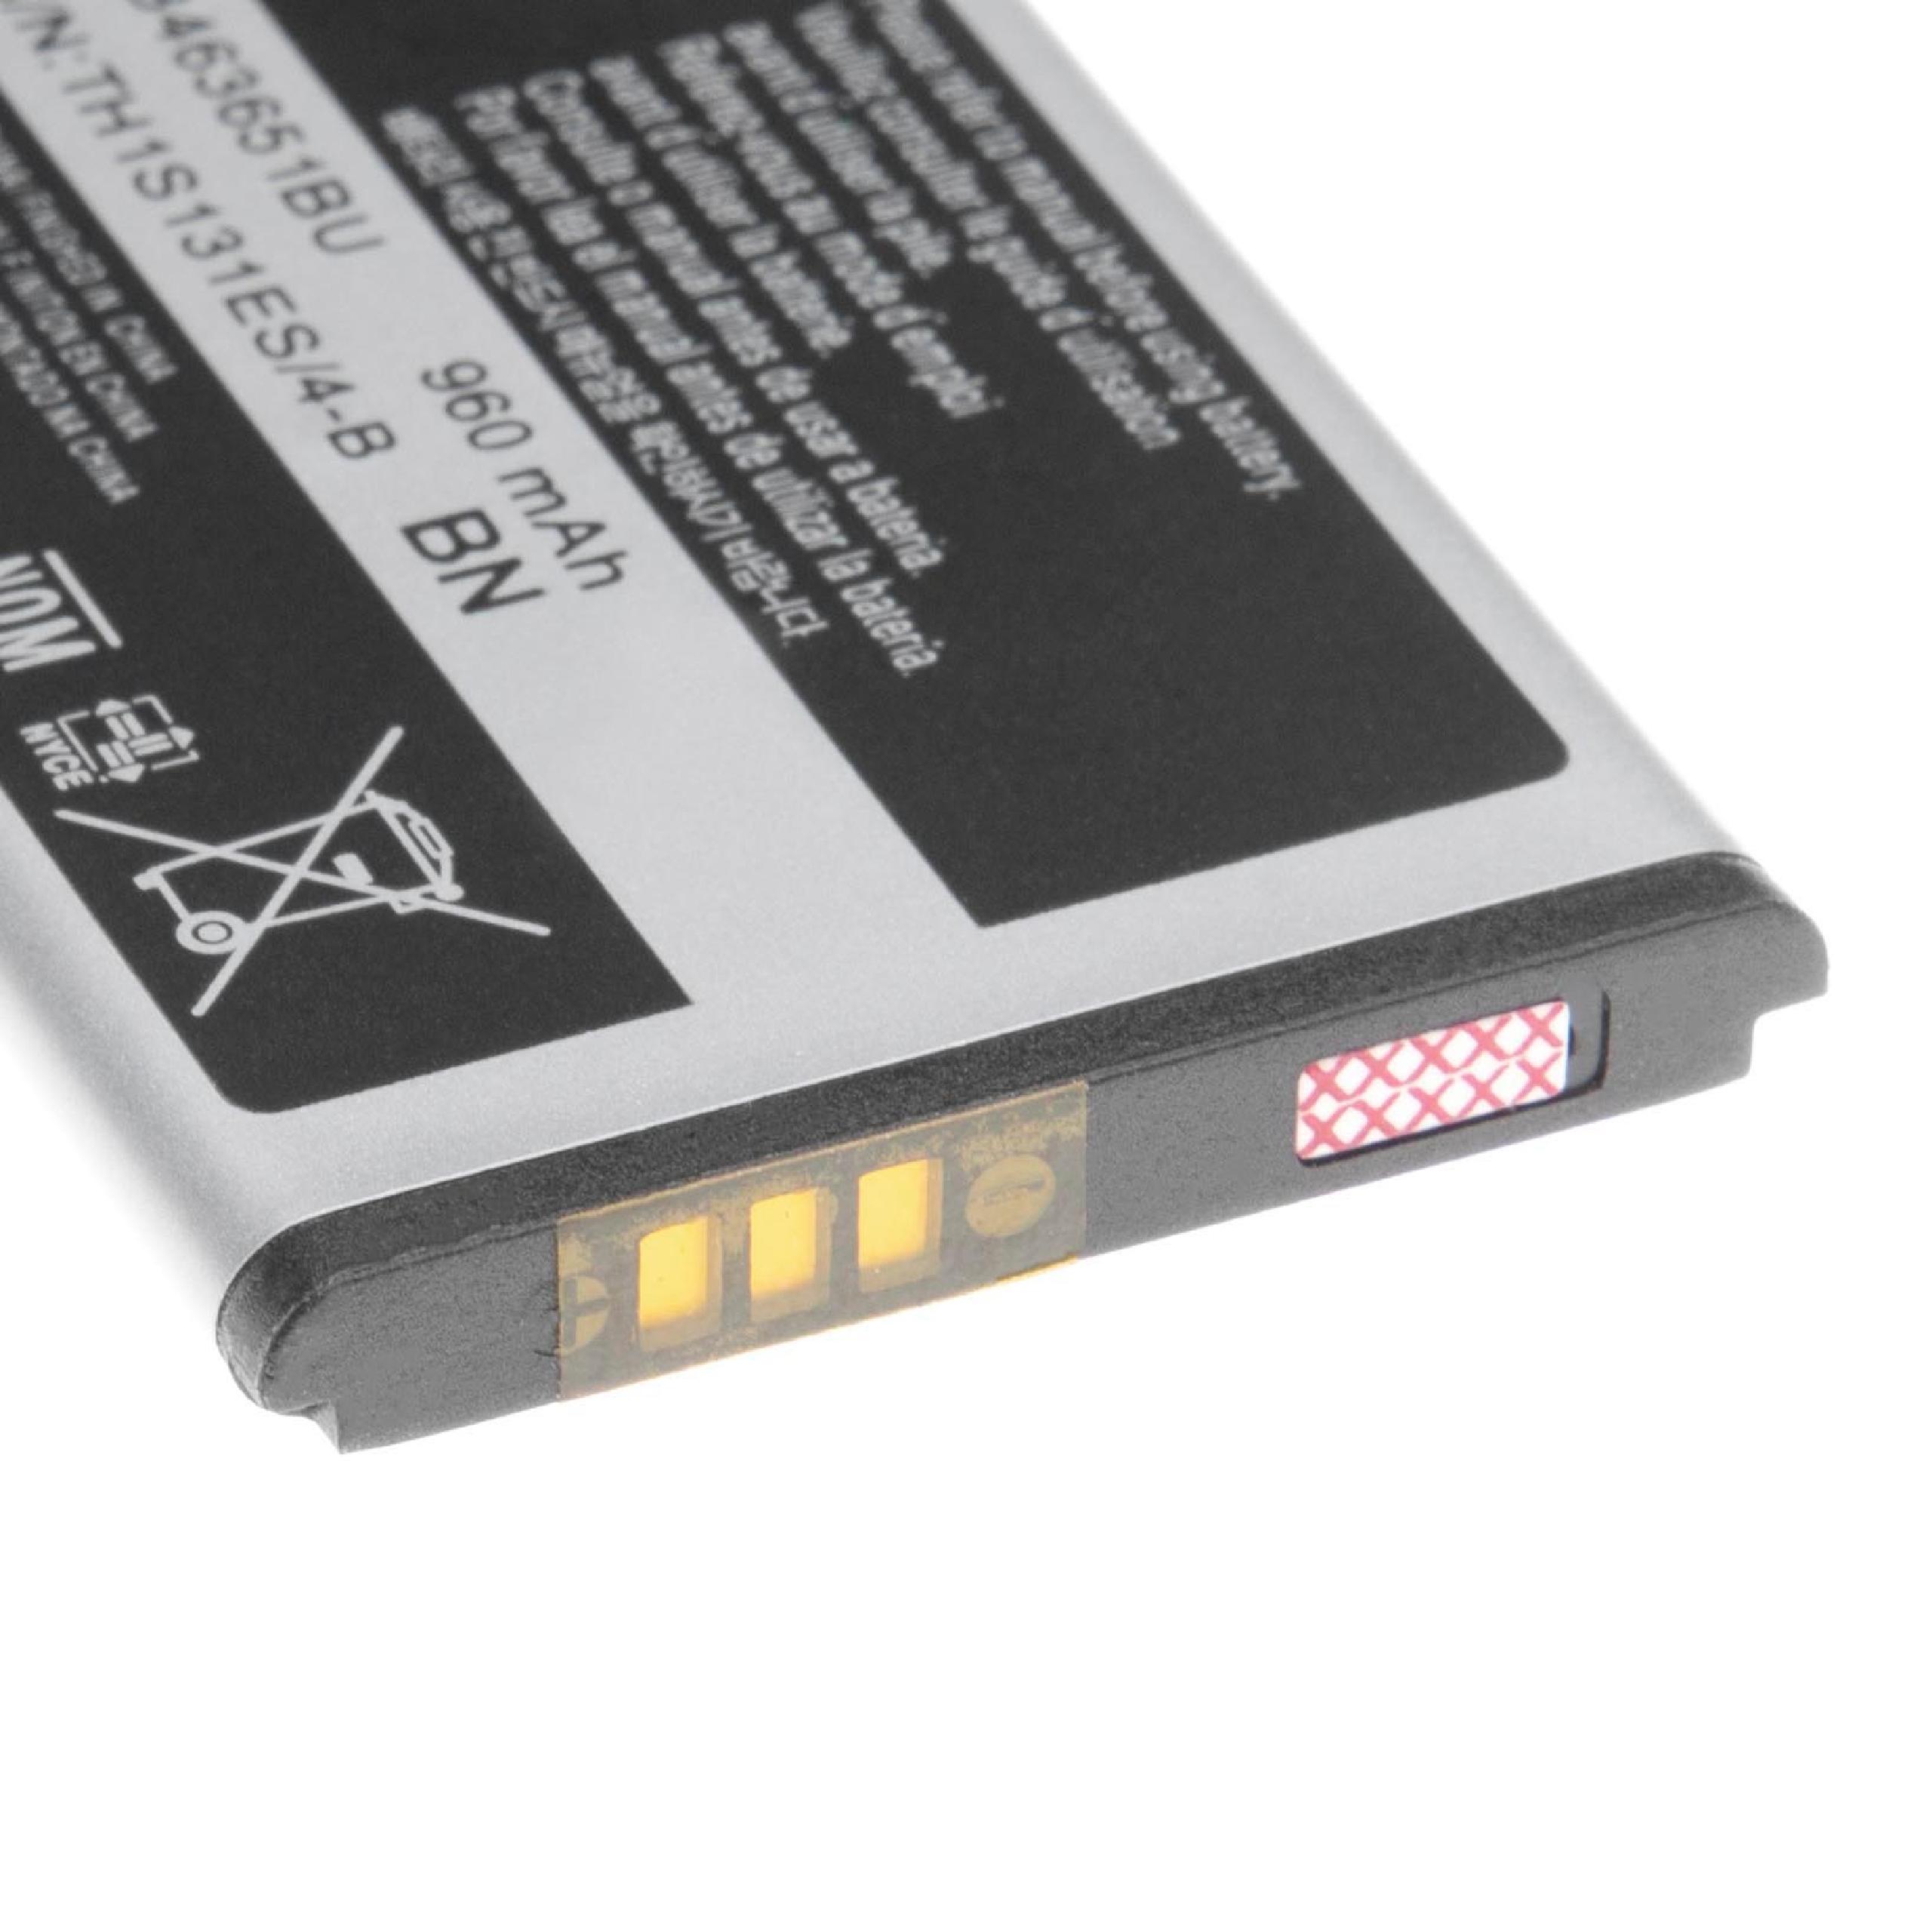 Mobile Phone Battery Replacement for Samsung AB463651BABSTD, AB463651BA, AB463651BC - 950mAh 3.7V Li-Ion